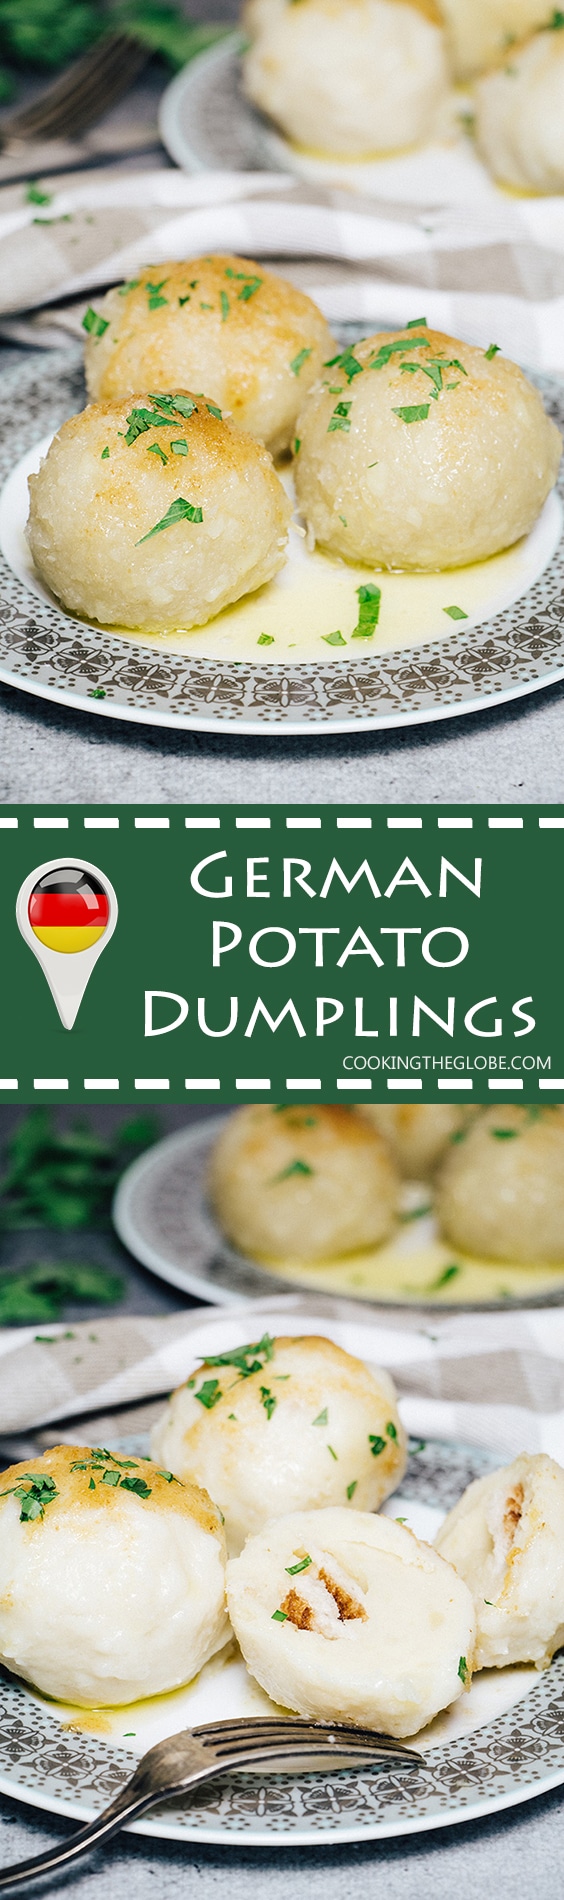 German Potato Dumplings, also known as Kartoffelkloesse, make a perfect side dish to literally anything but are also great as a standalone dish! | cookingtheglobe.com